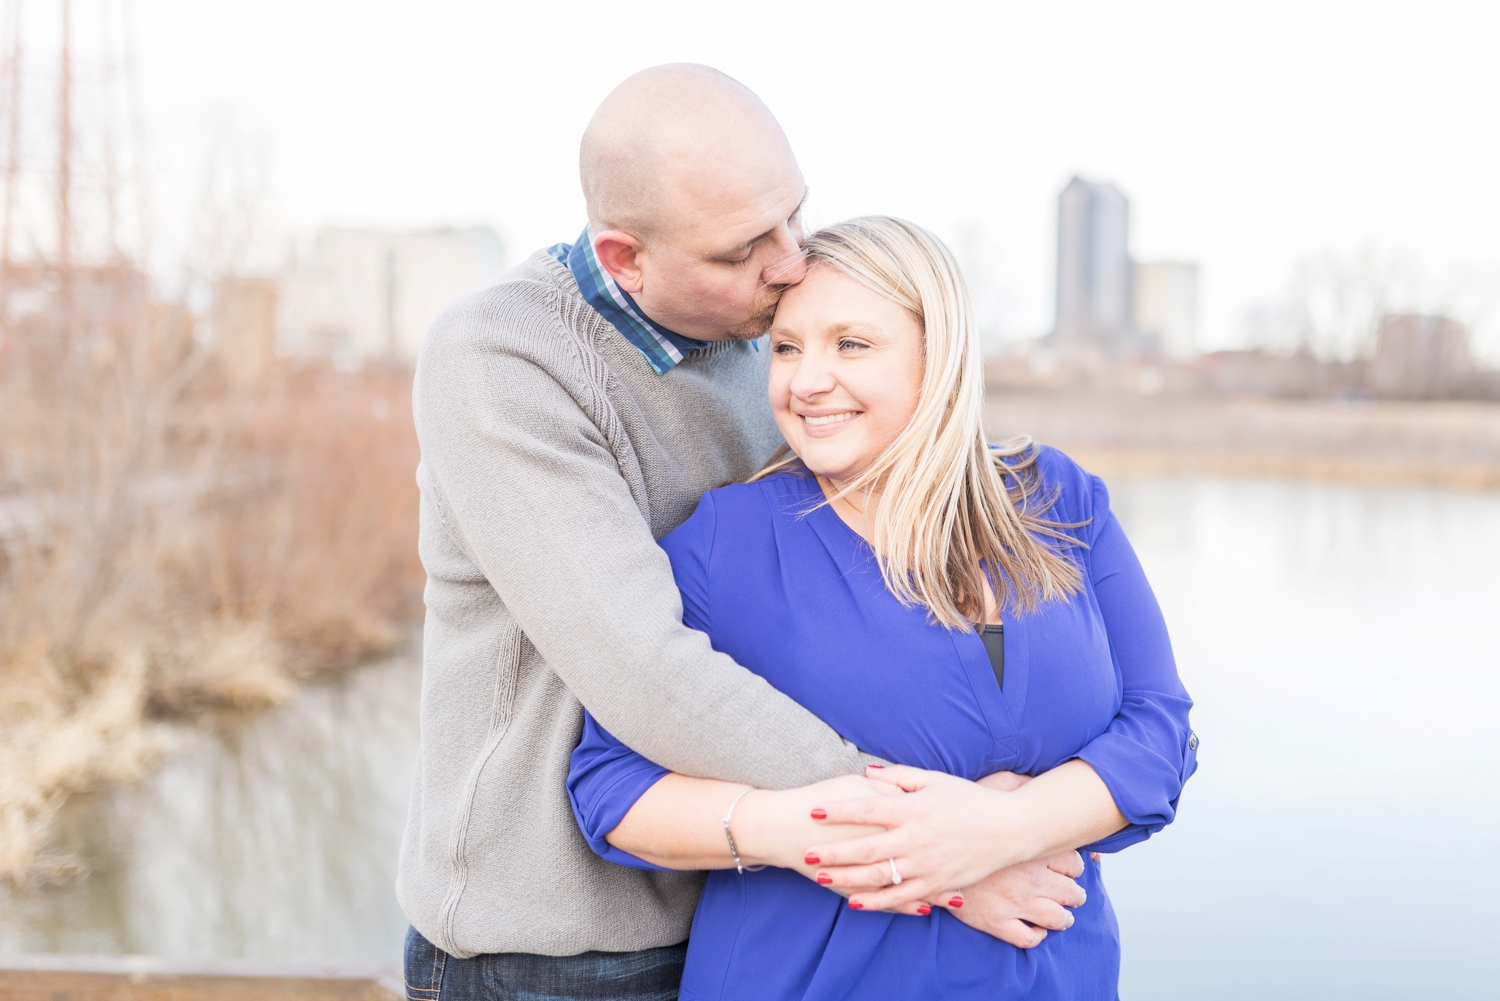 winter-engaged-couple-at-their-photo-session-at-the-scioto-audubon-park-near-grange-audubon-center-with-walkways-and-grass_0353